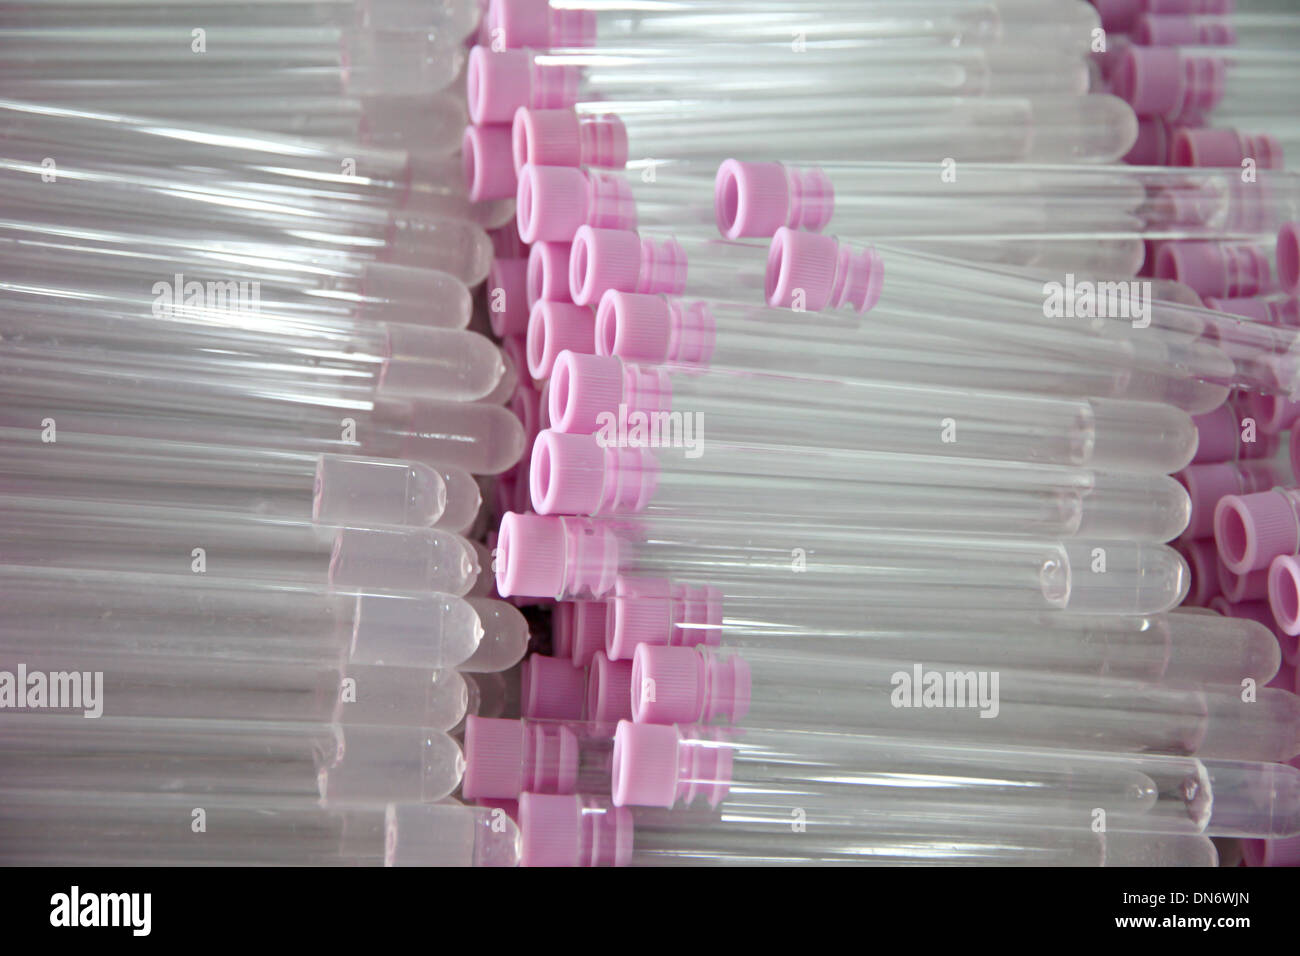 The Picture Tubes used to collect samples of stool test. Stock Photo